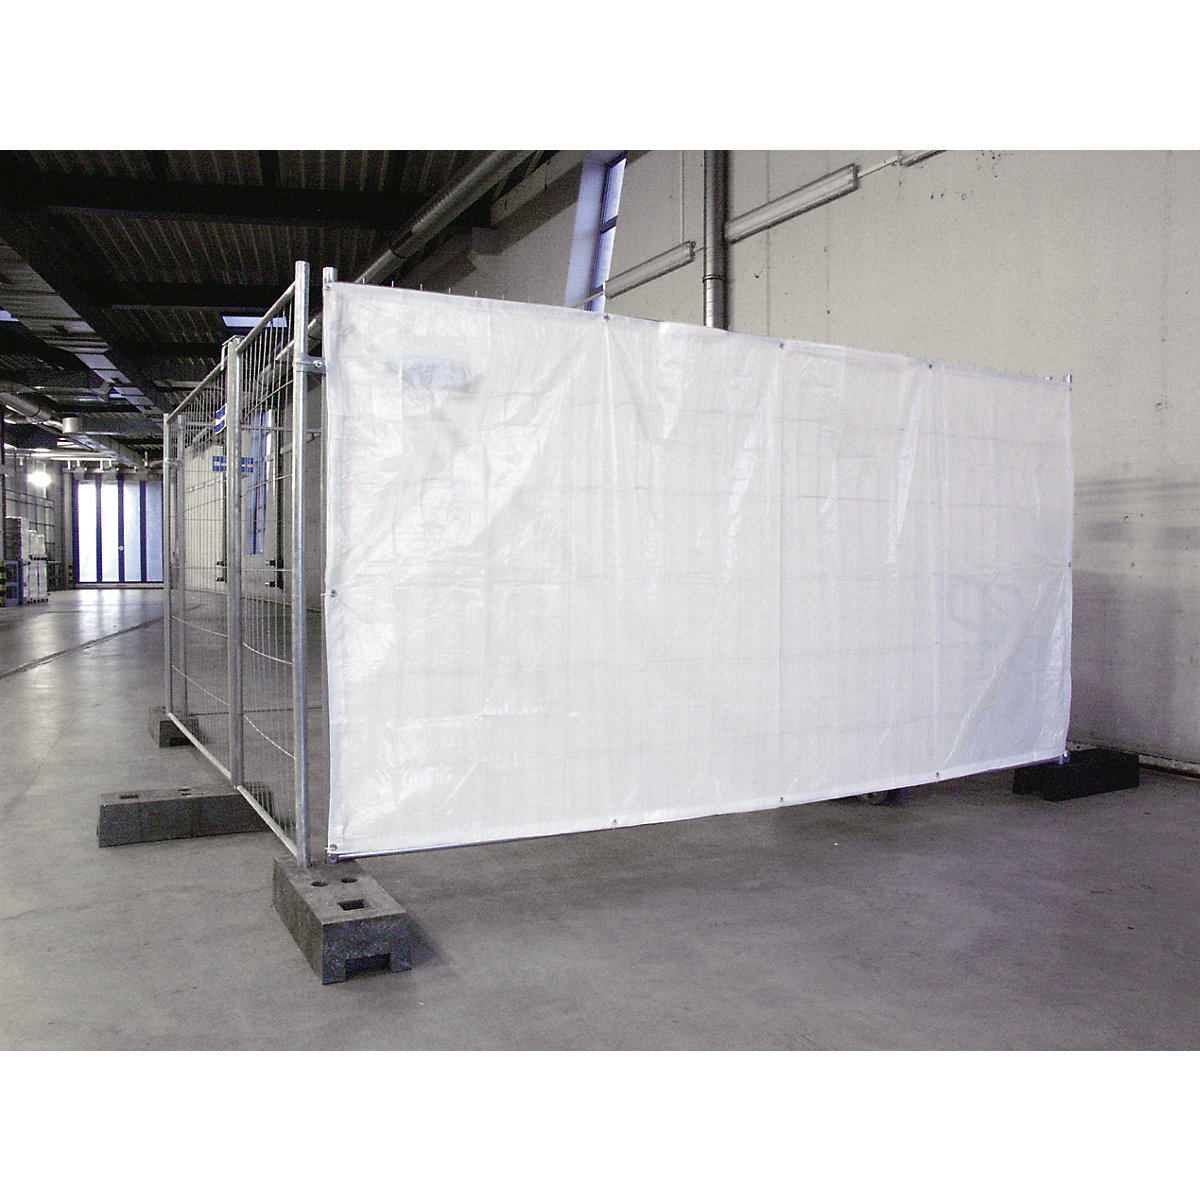 Opaque sheet for mobile security fencing – Schake